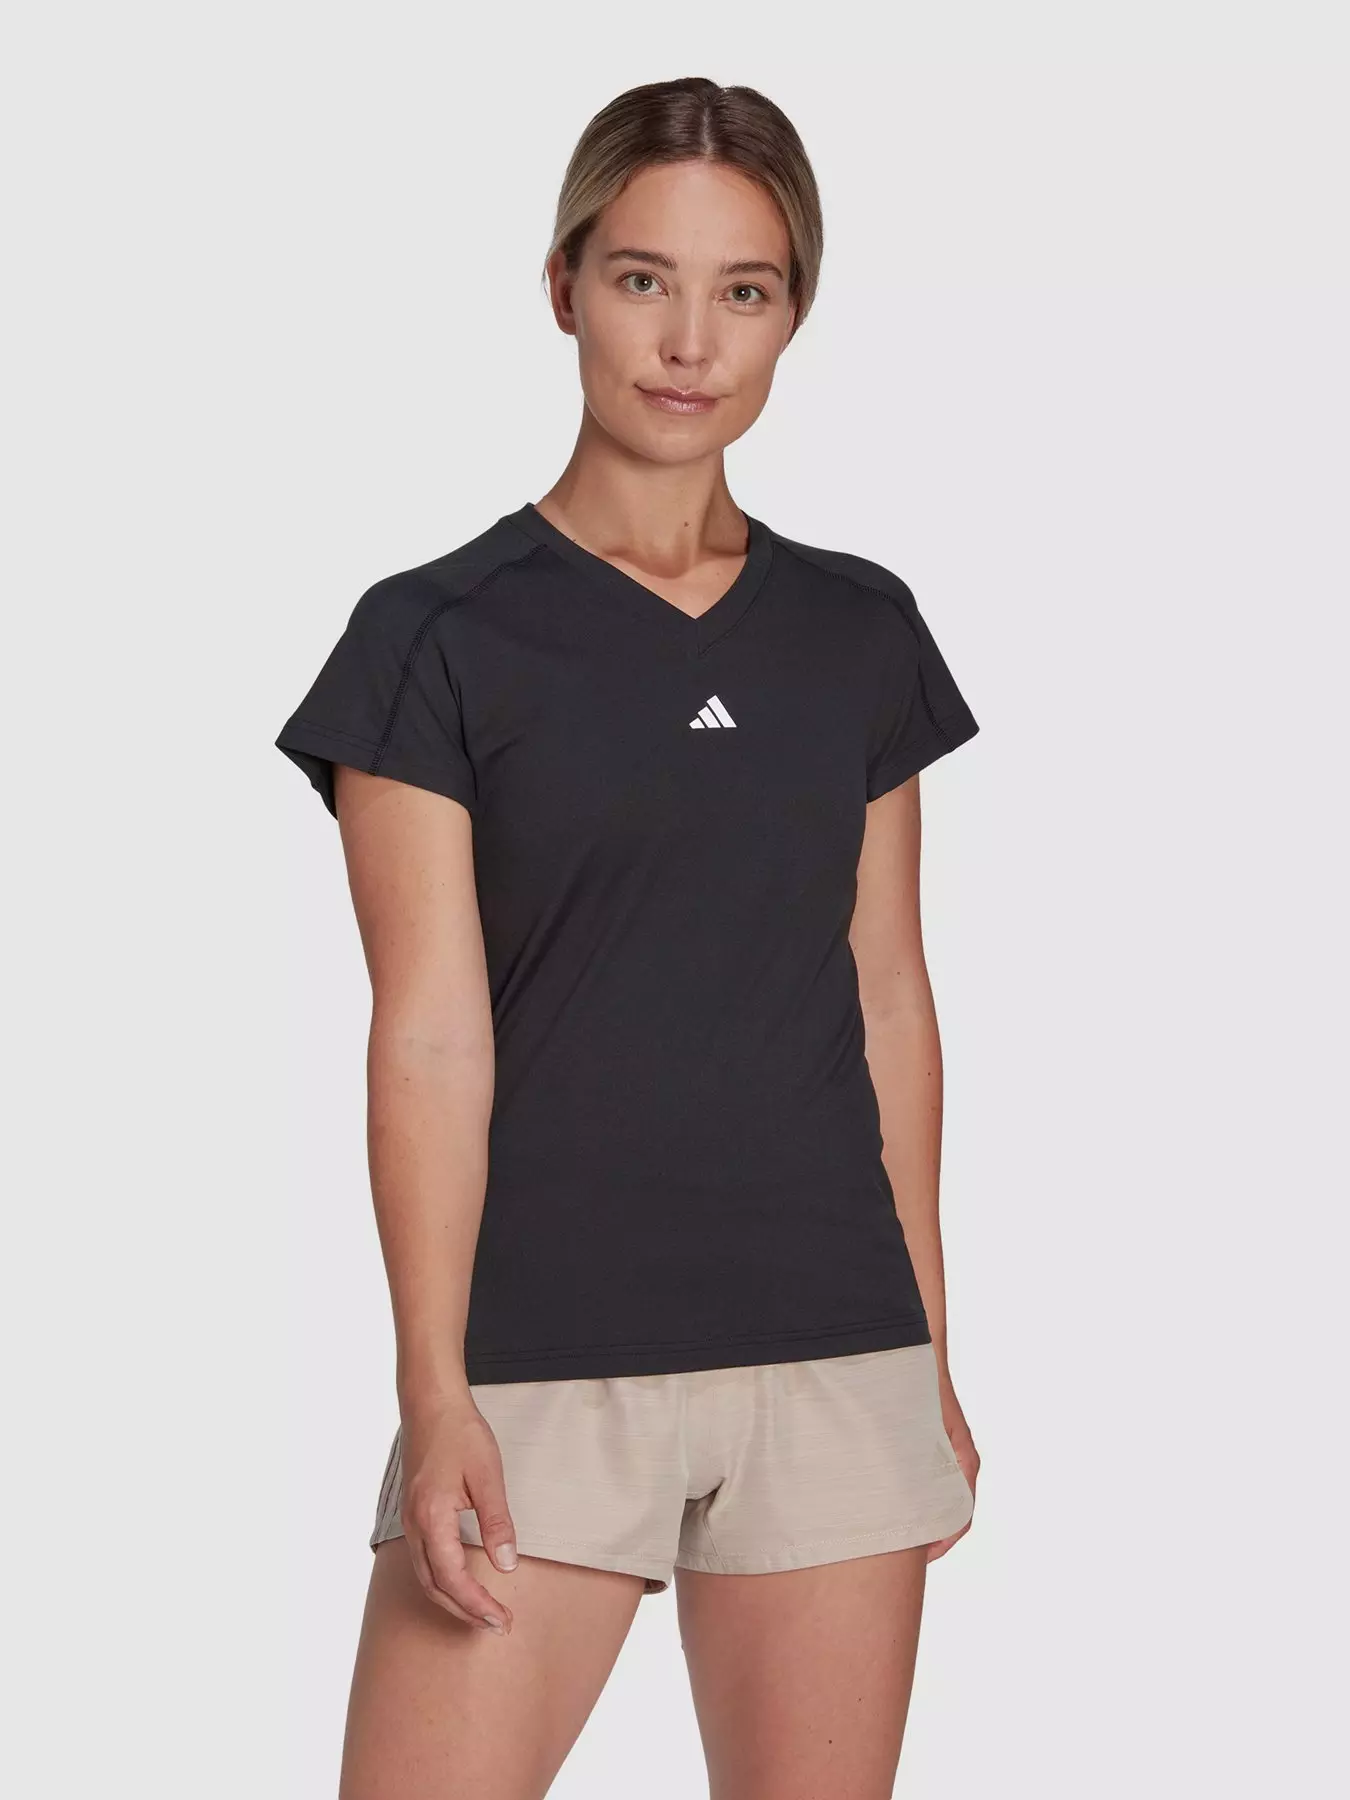 Womens sports clothing, Sports & leisure, Brand